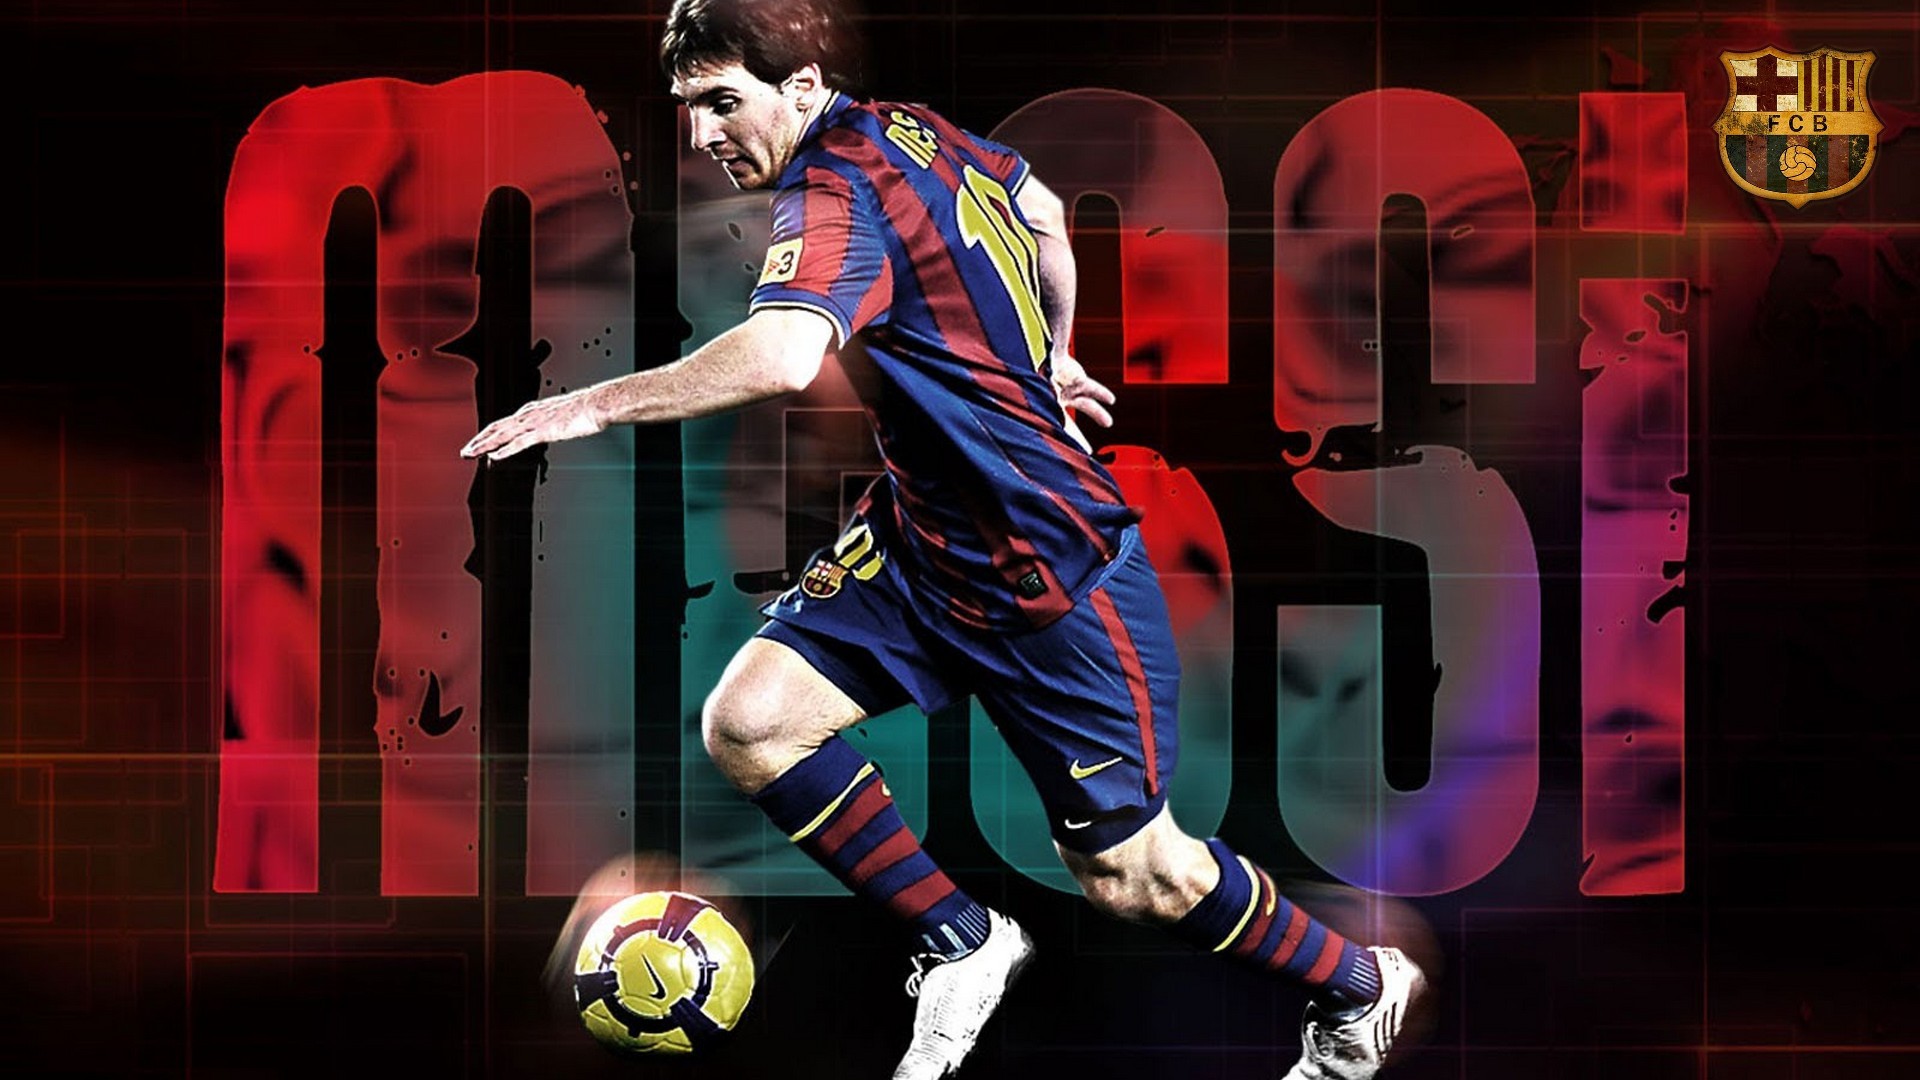 Lionel Messi Barcelona Wallpaper For Mac Backgrounds with resolution 1920x1080 pixel. You can make this wallpaper for your Mac or Windows Desktop Background, iPhone, Android or Tablet and another Smartphone device